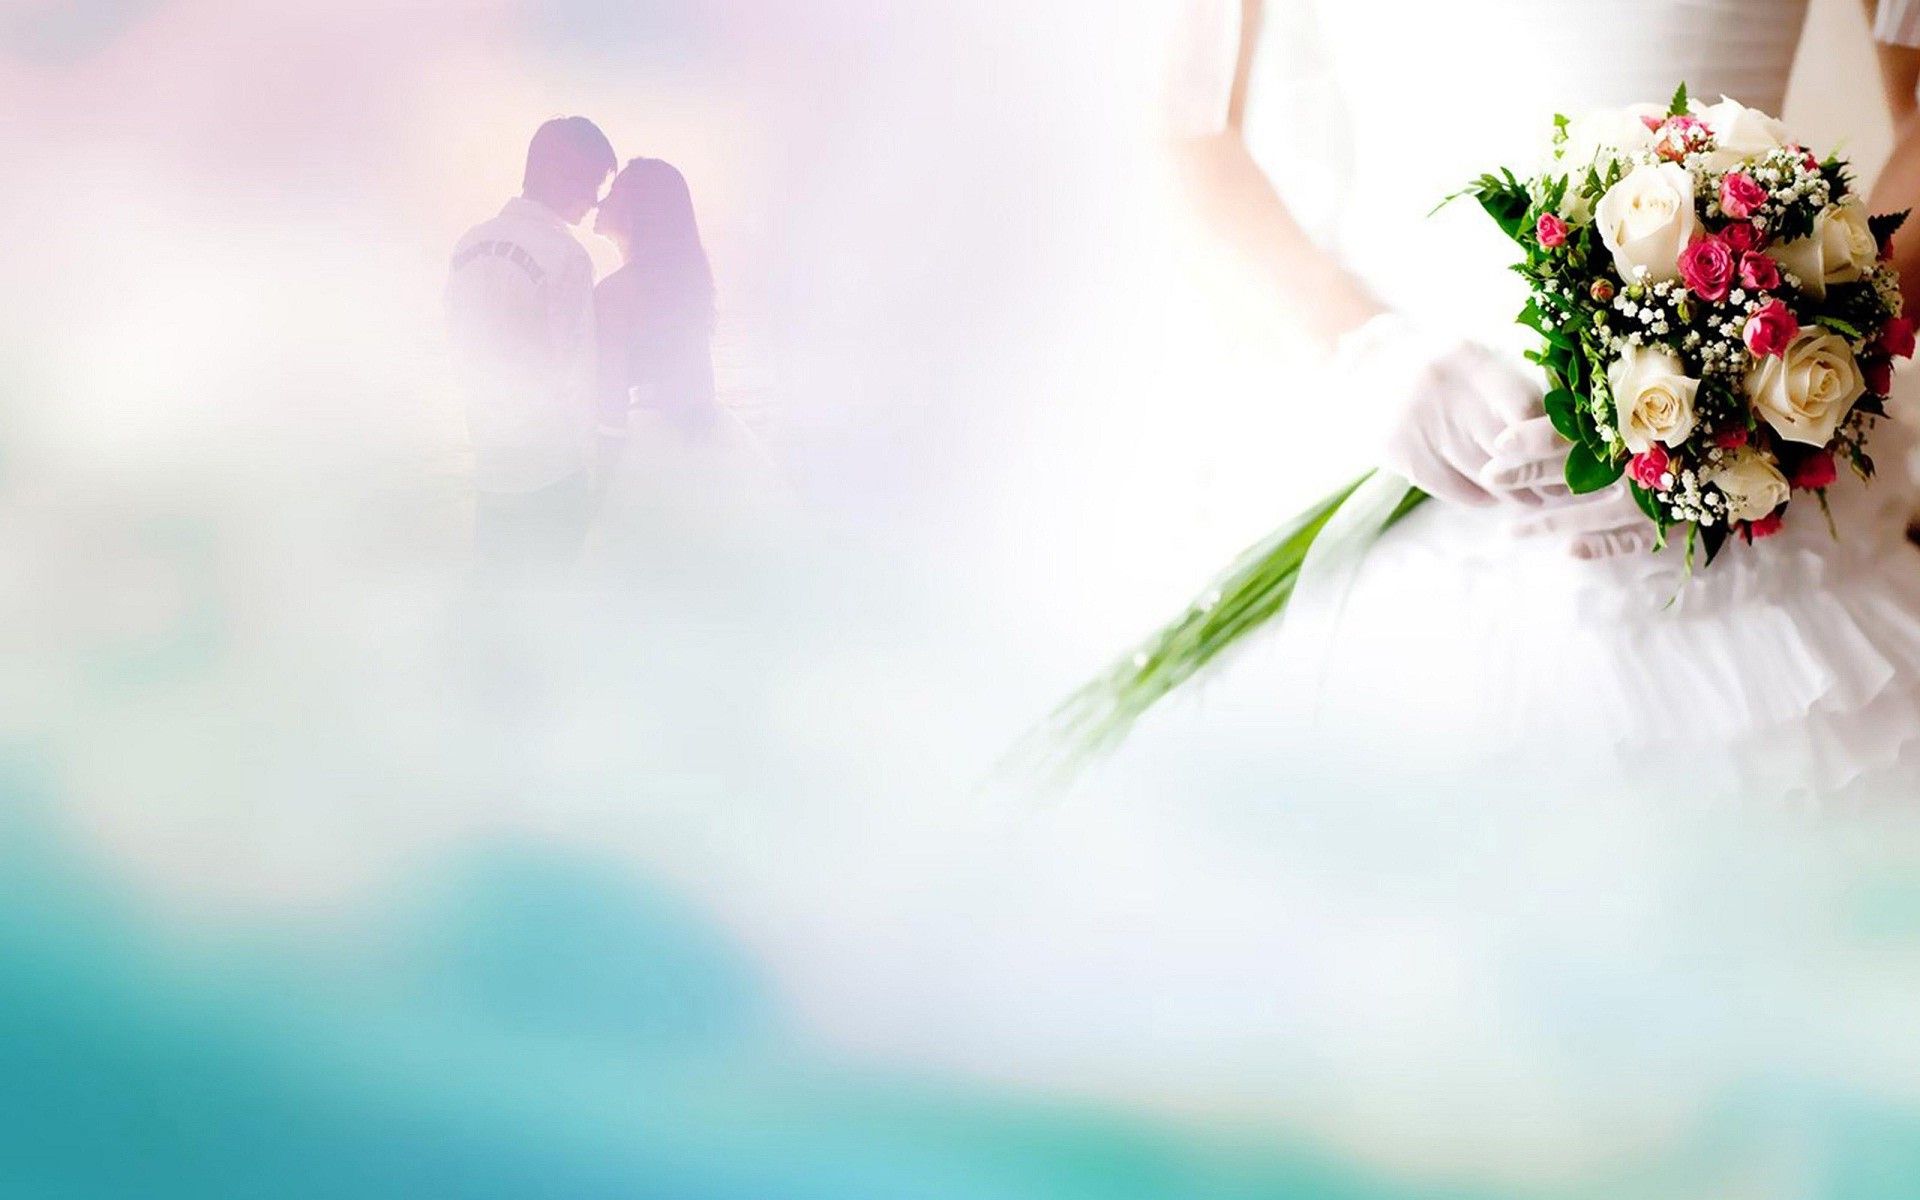 Wedding anniversary wishes for friends and family hd wallpapers  naveengfx